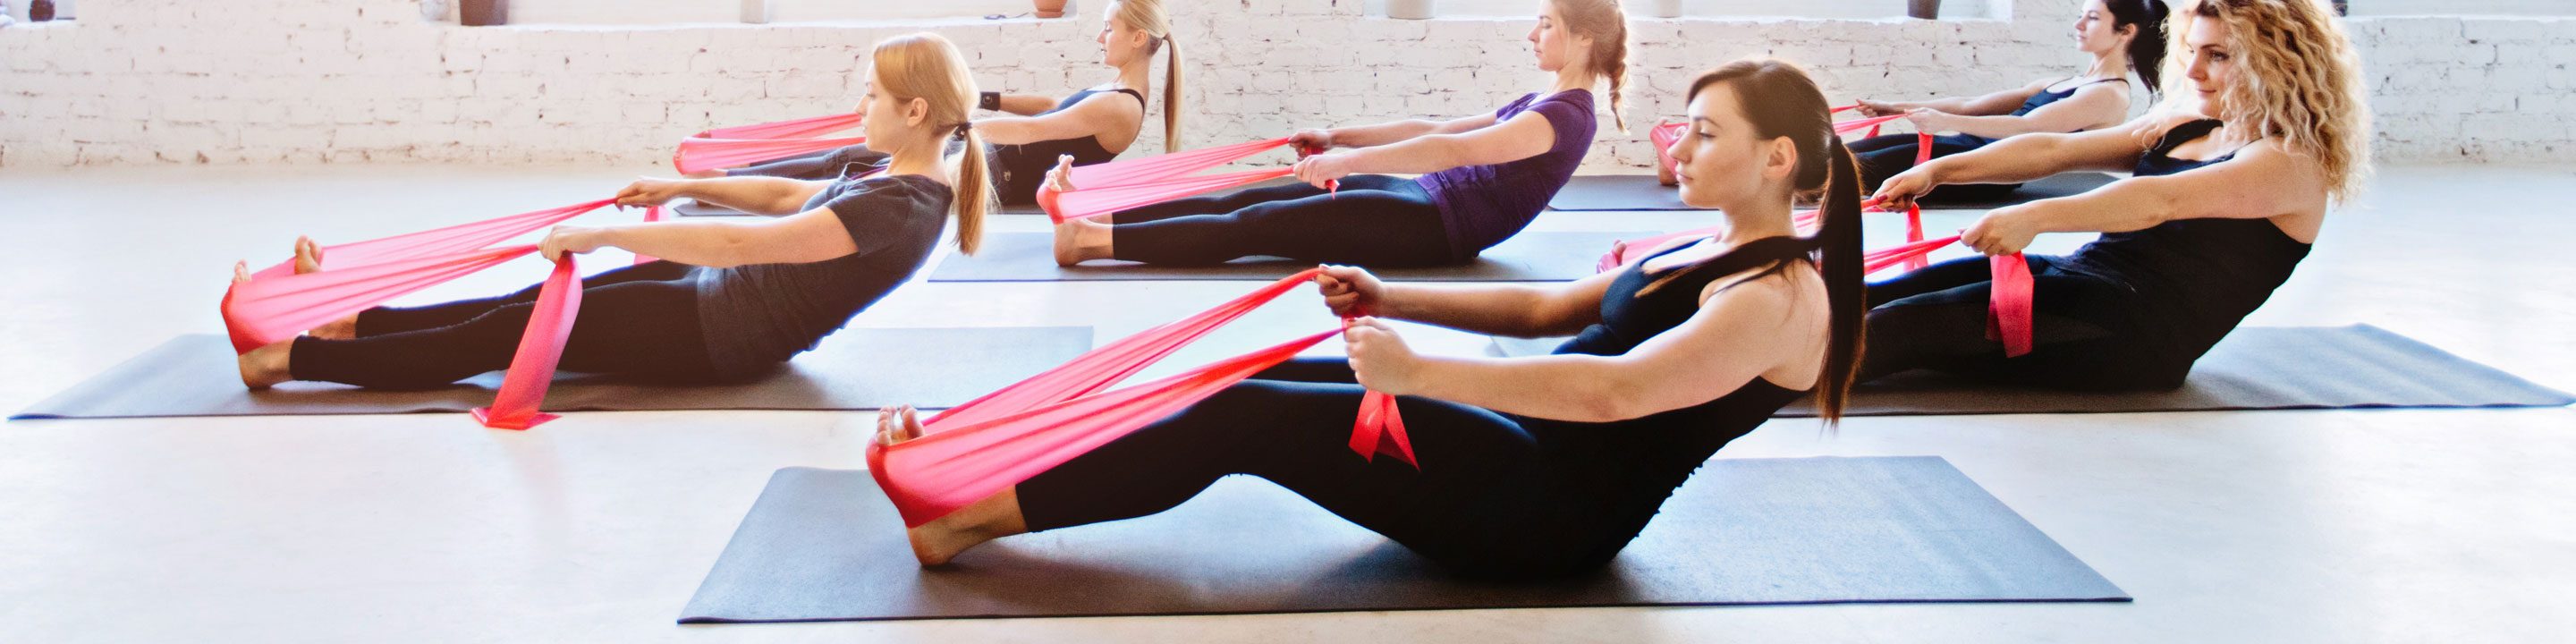 Gyms & Pilates in Athens